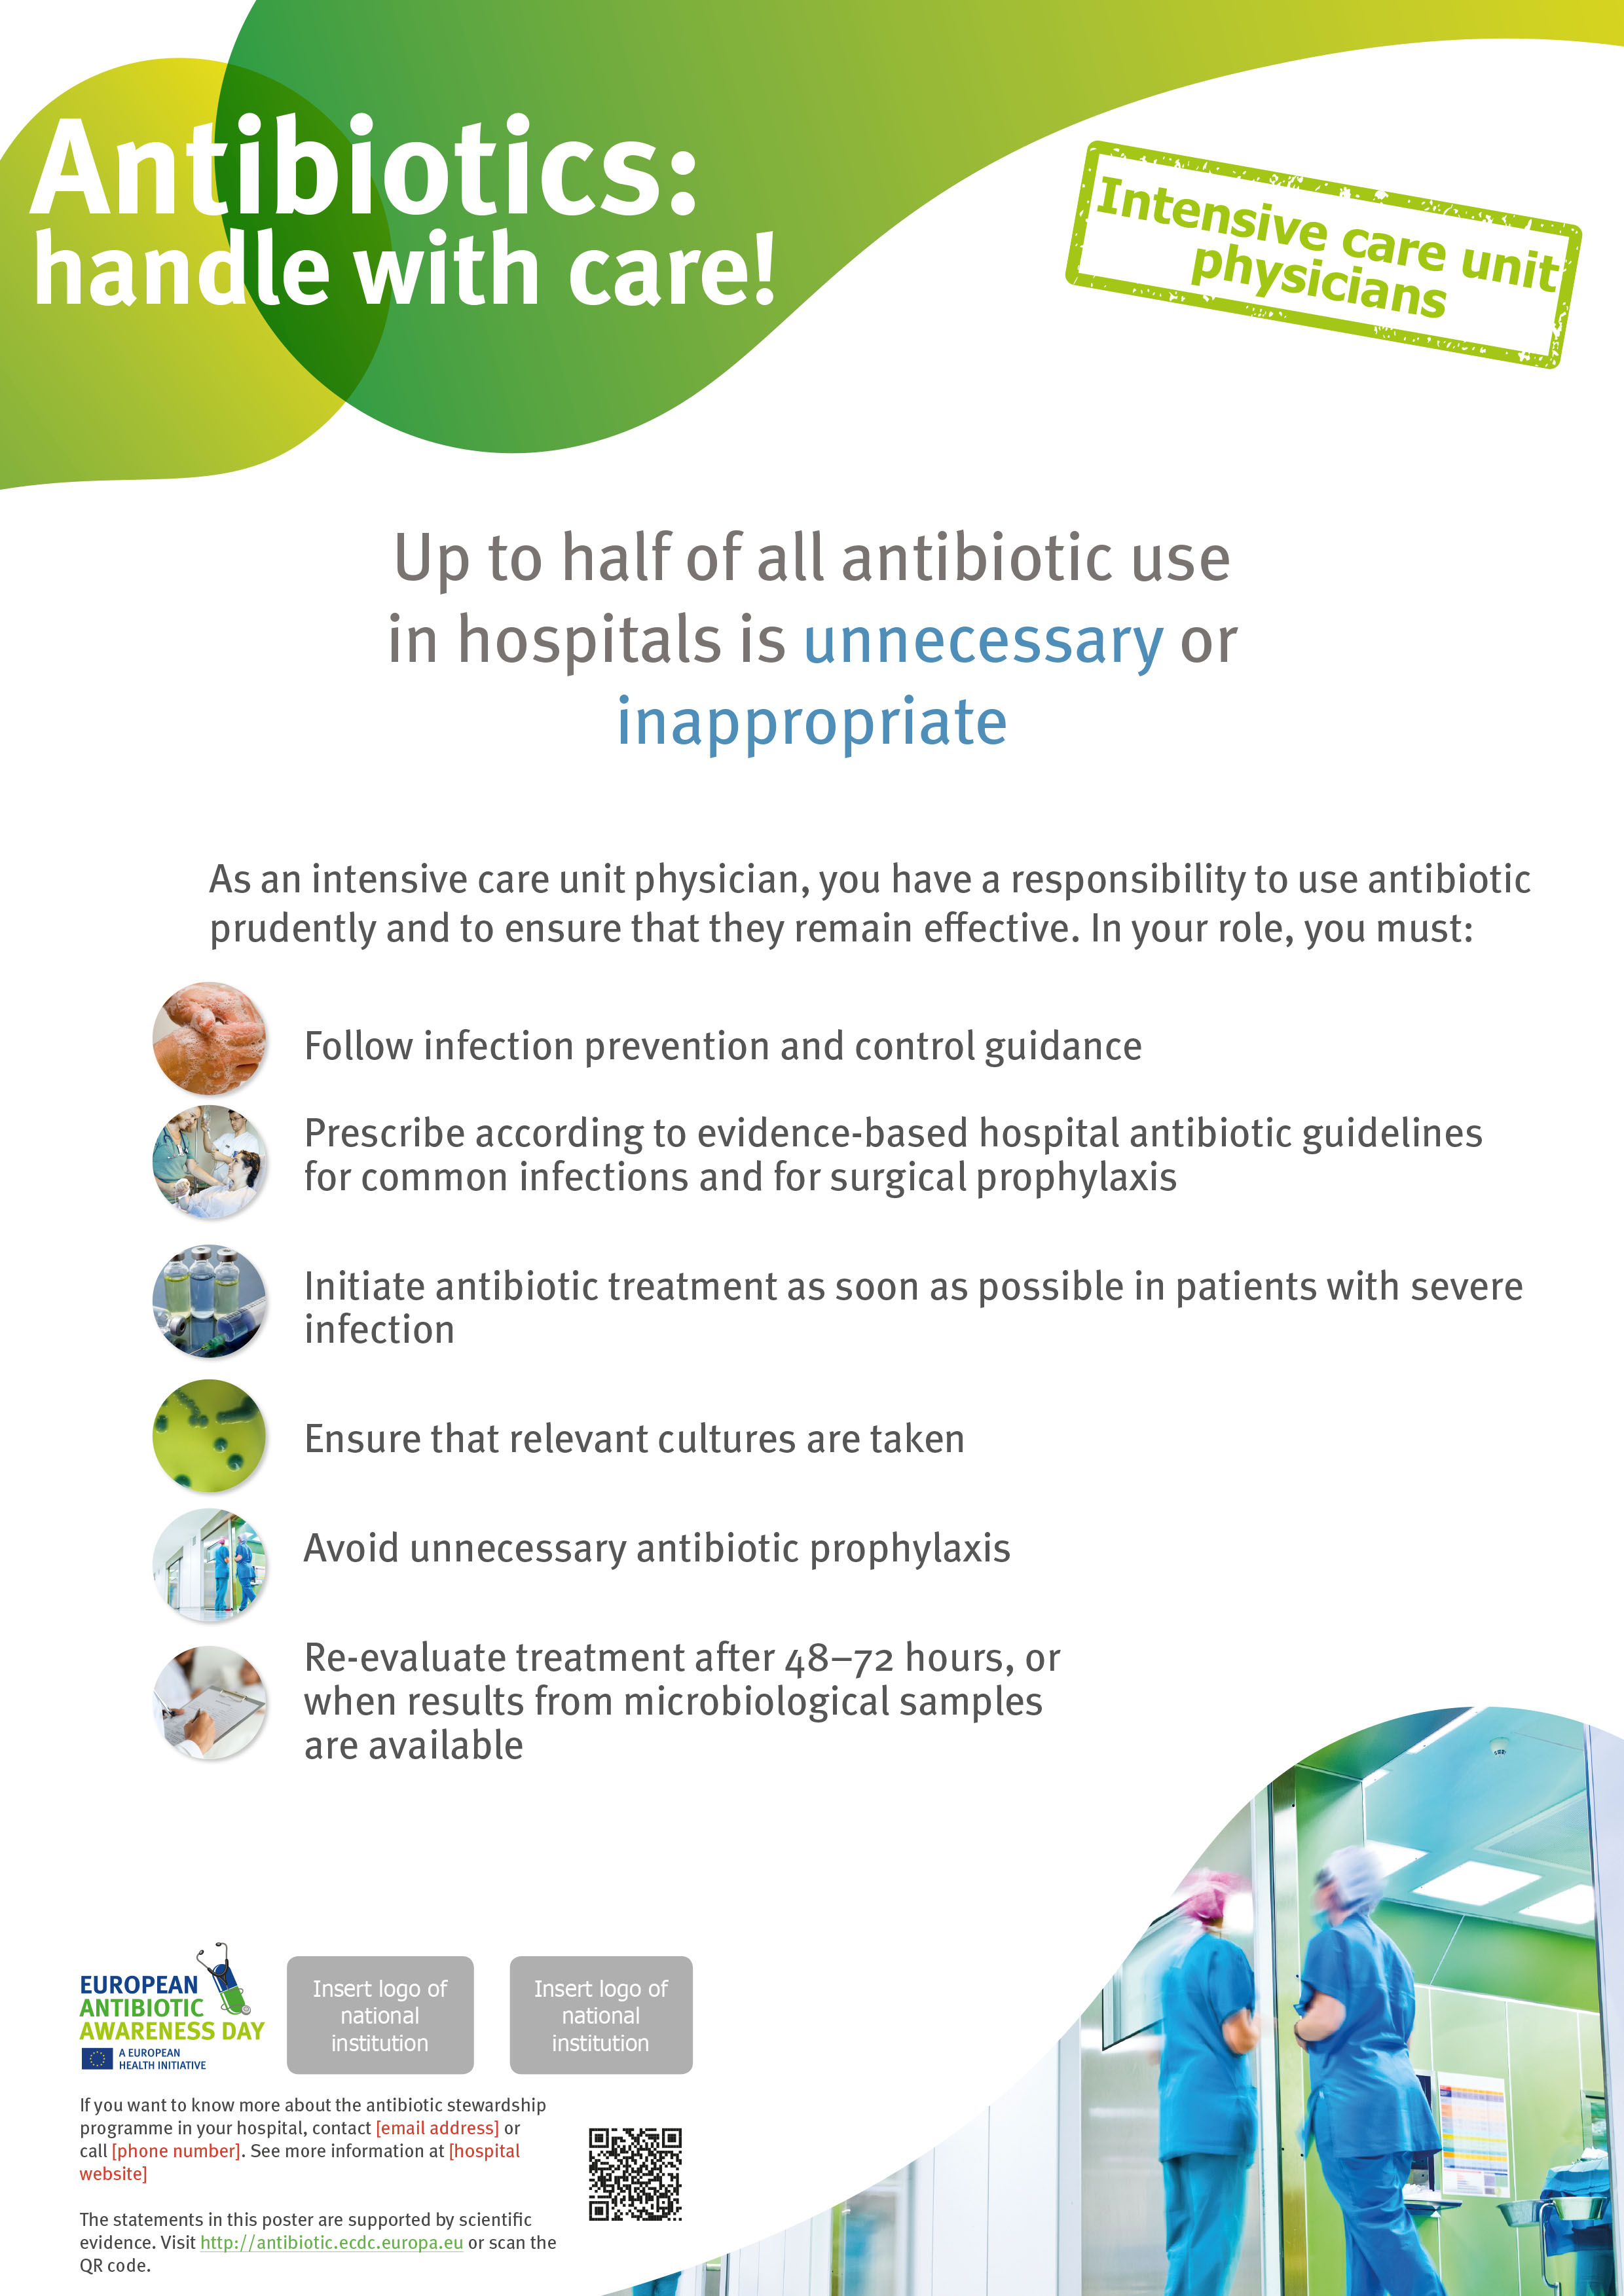 Poster For Intensive Care Unit Physicians Things To Do To Keep Antibiotics Working